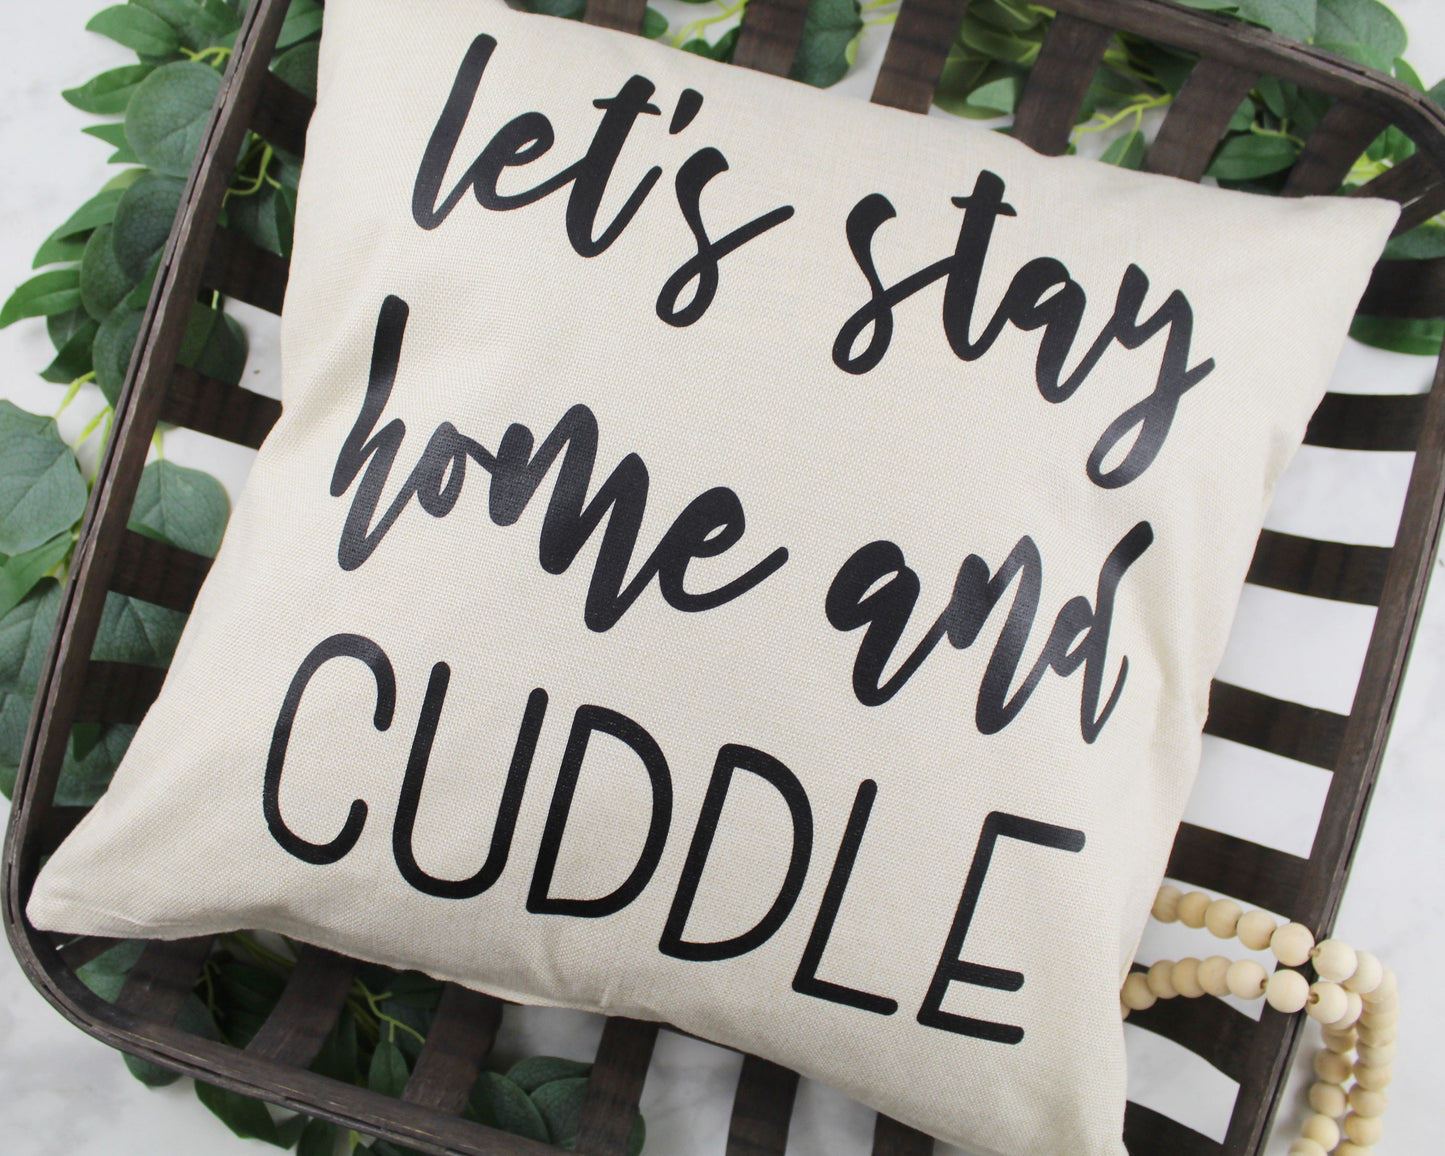 Let’s Stay Home and Cuddle Throw Pillow